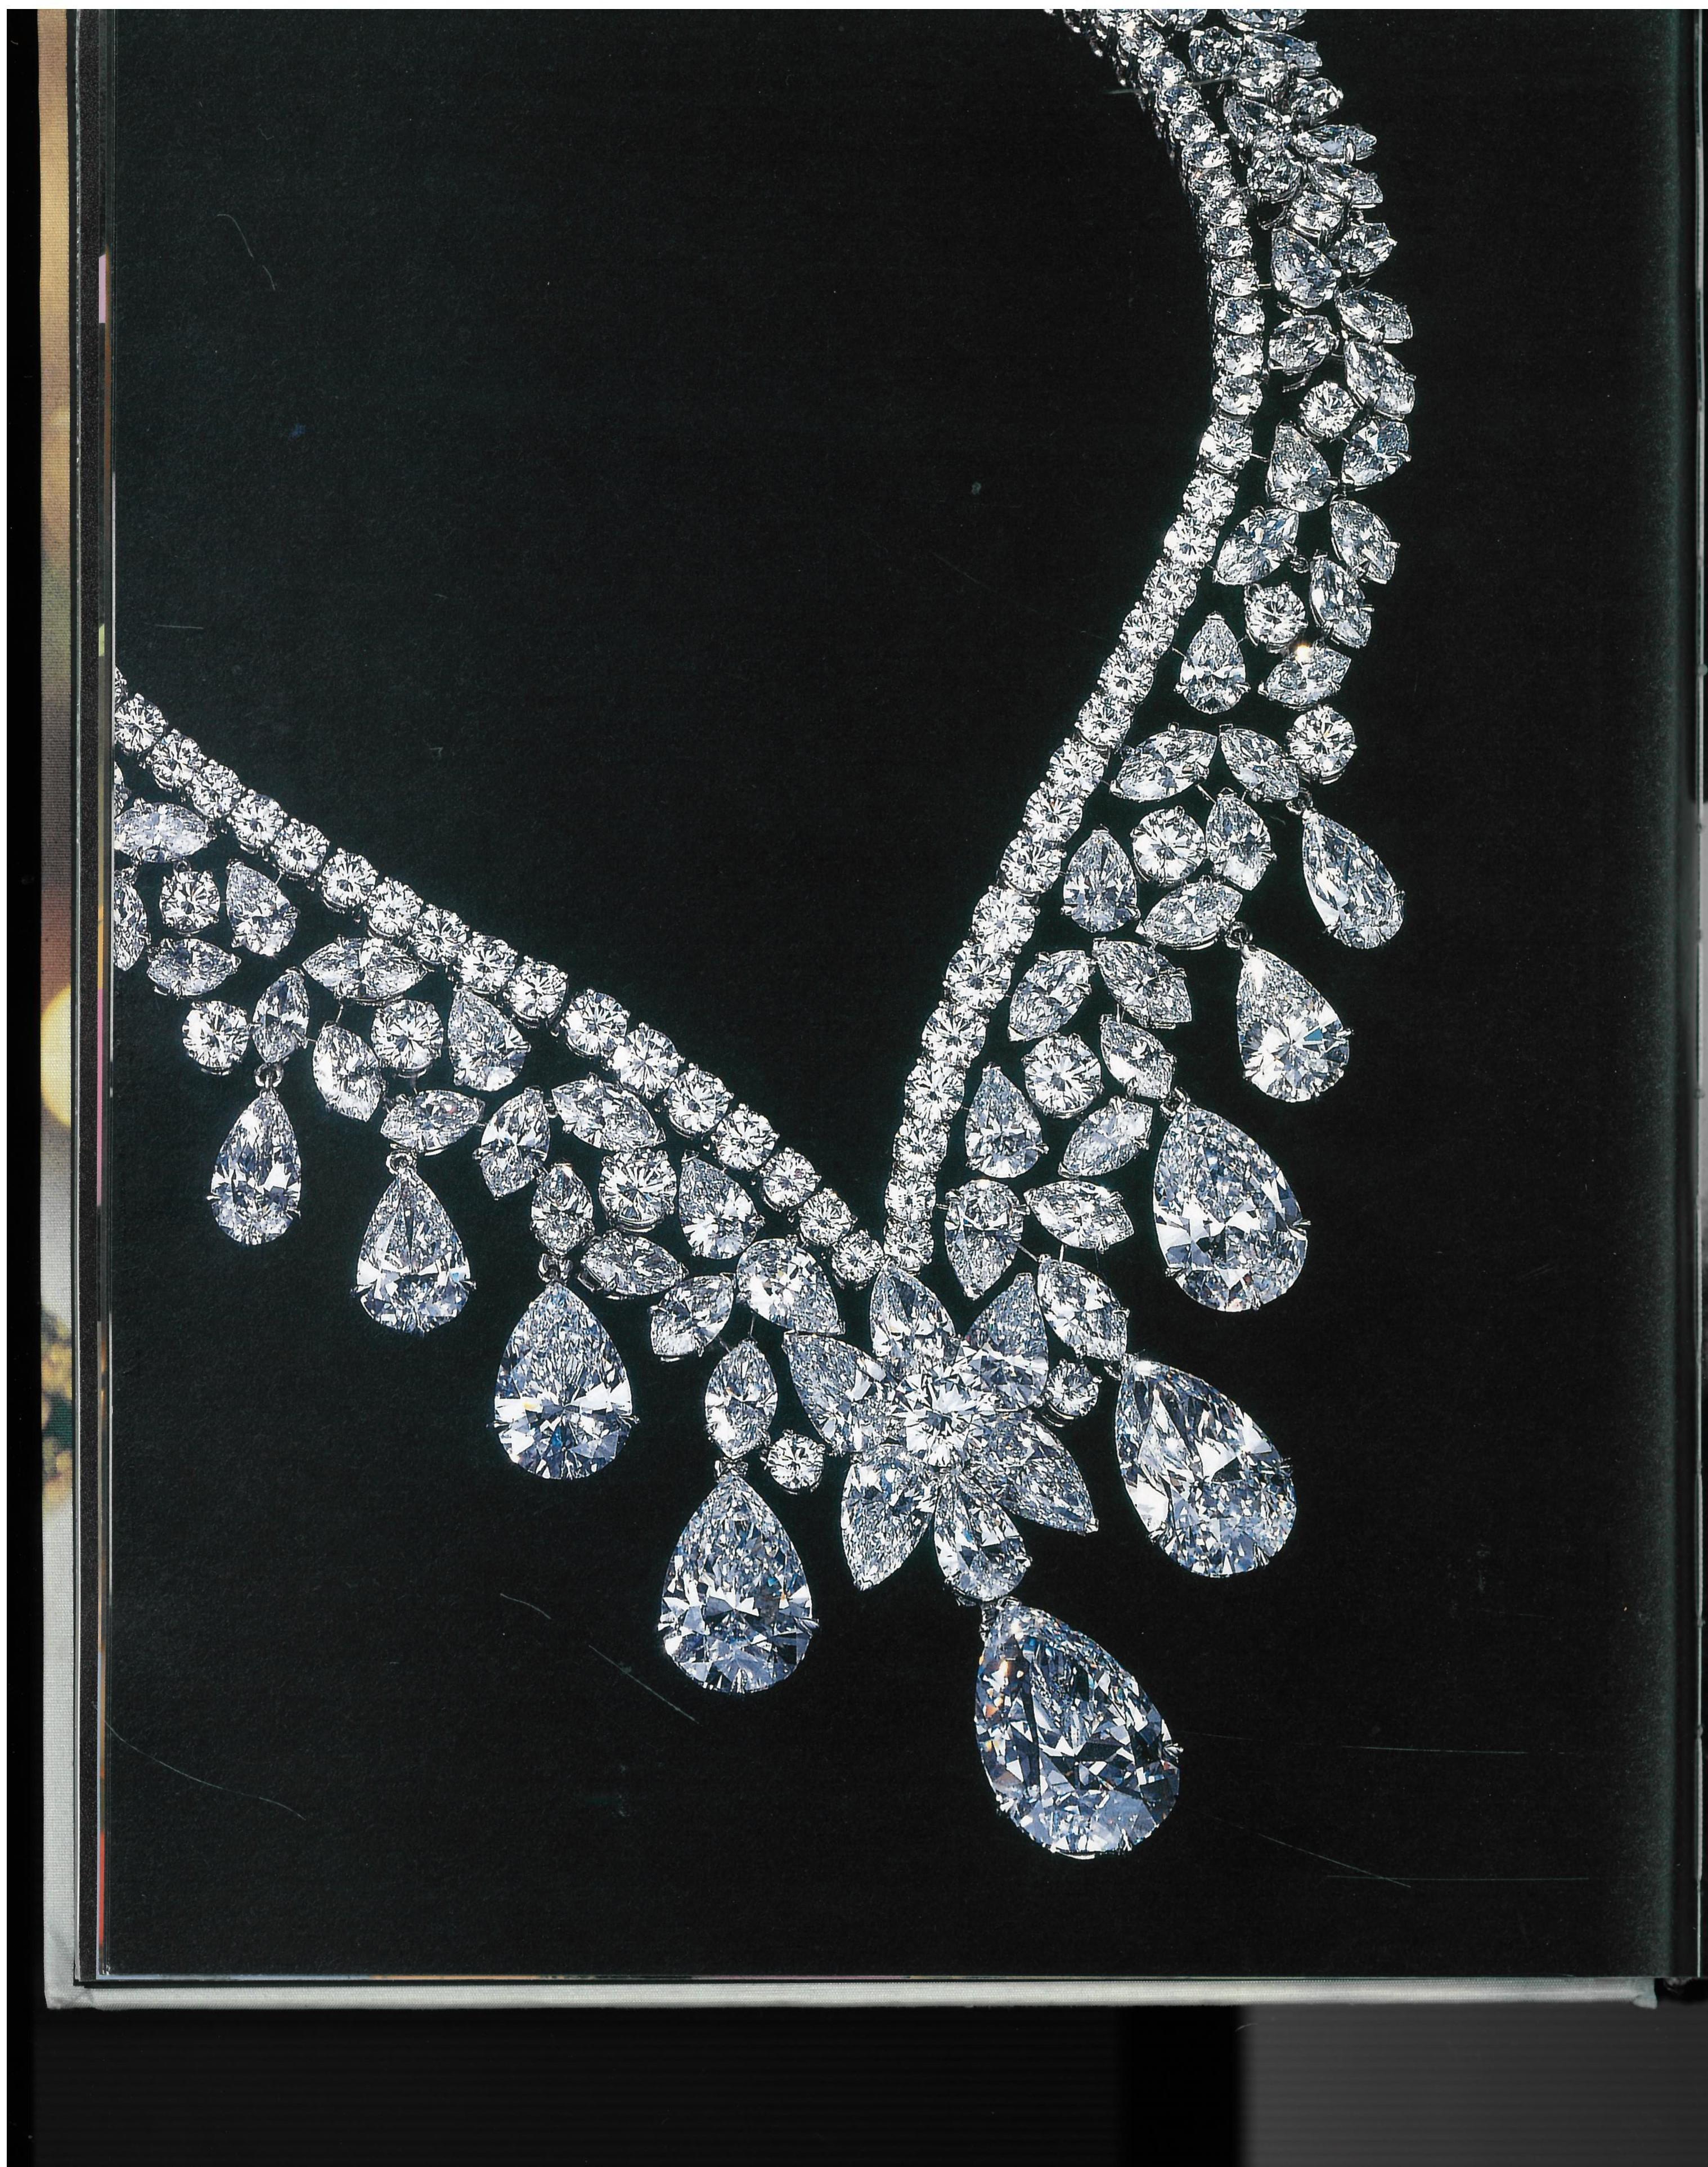 A large beautiful photographic book on the work of the renowned house of Cartier. There is an illustrated index with text in French and English to the rear of the book with descriptions of the pieces that feature in each of the full page